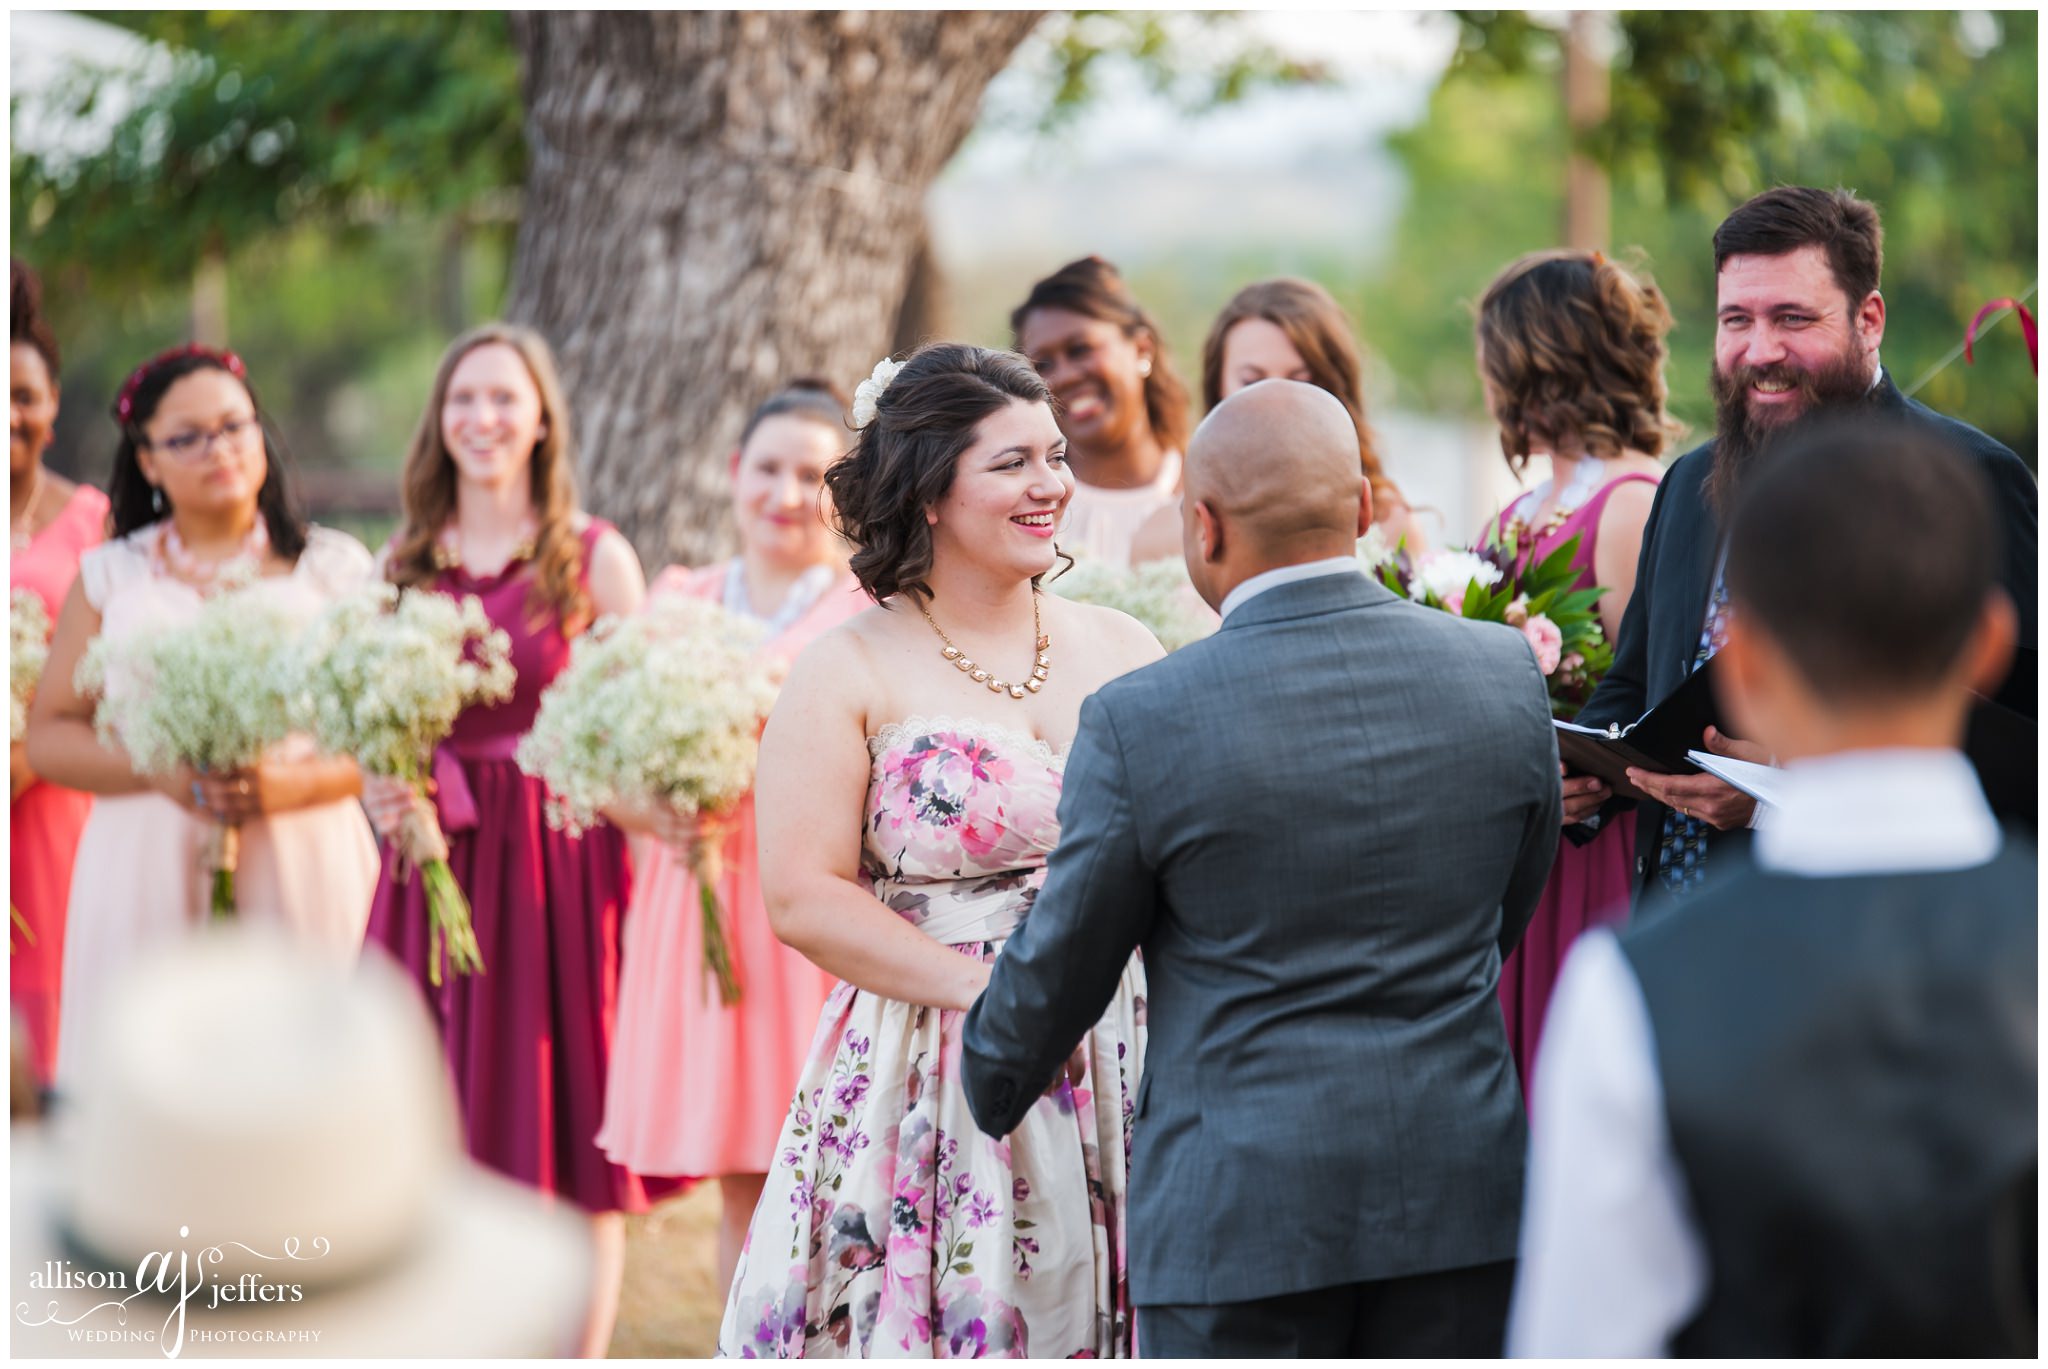 Kerrville Wedding Photographer Unique fun wedding with floral dress 0030